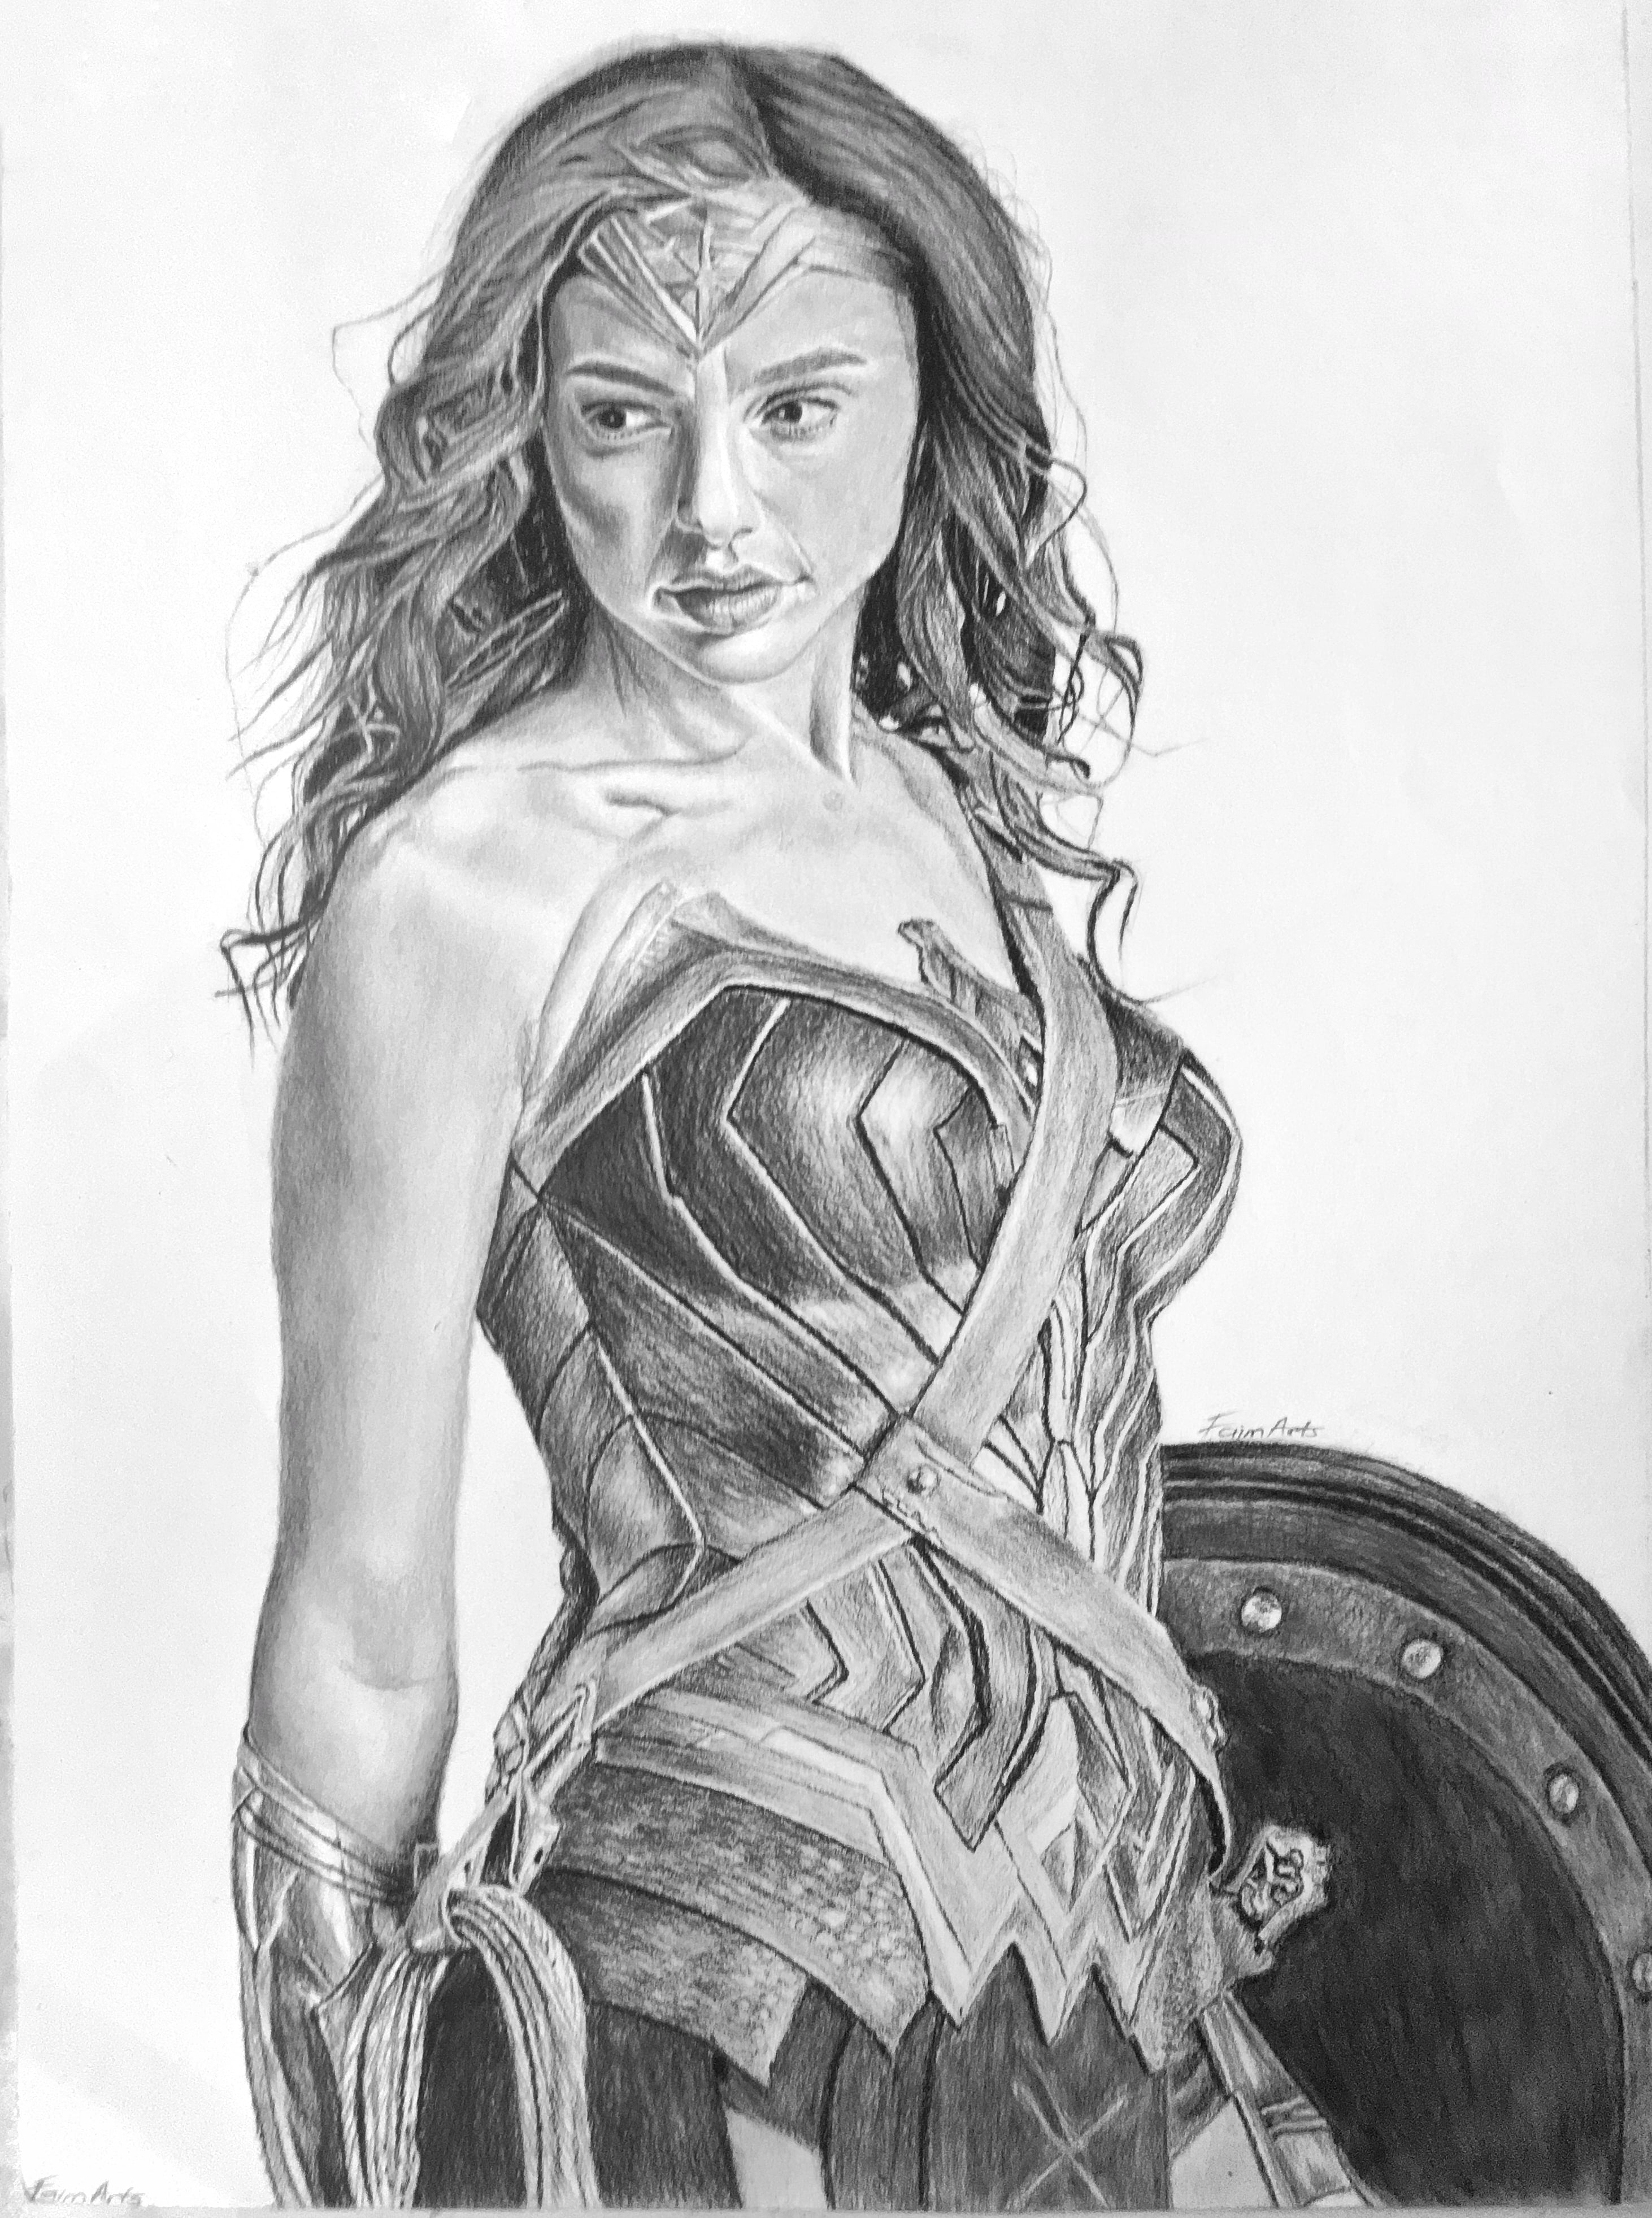 A graphite and charcoal pencil drawing depicting Gal Gadot as wonder woman